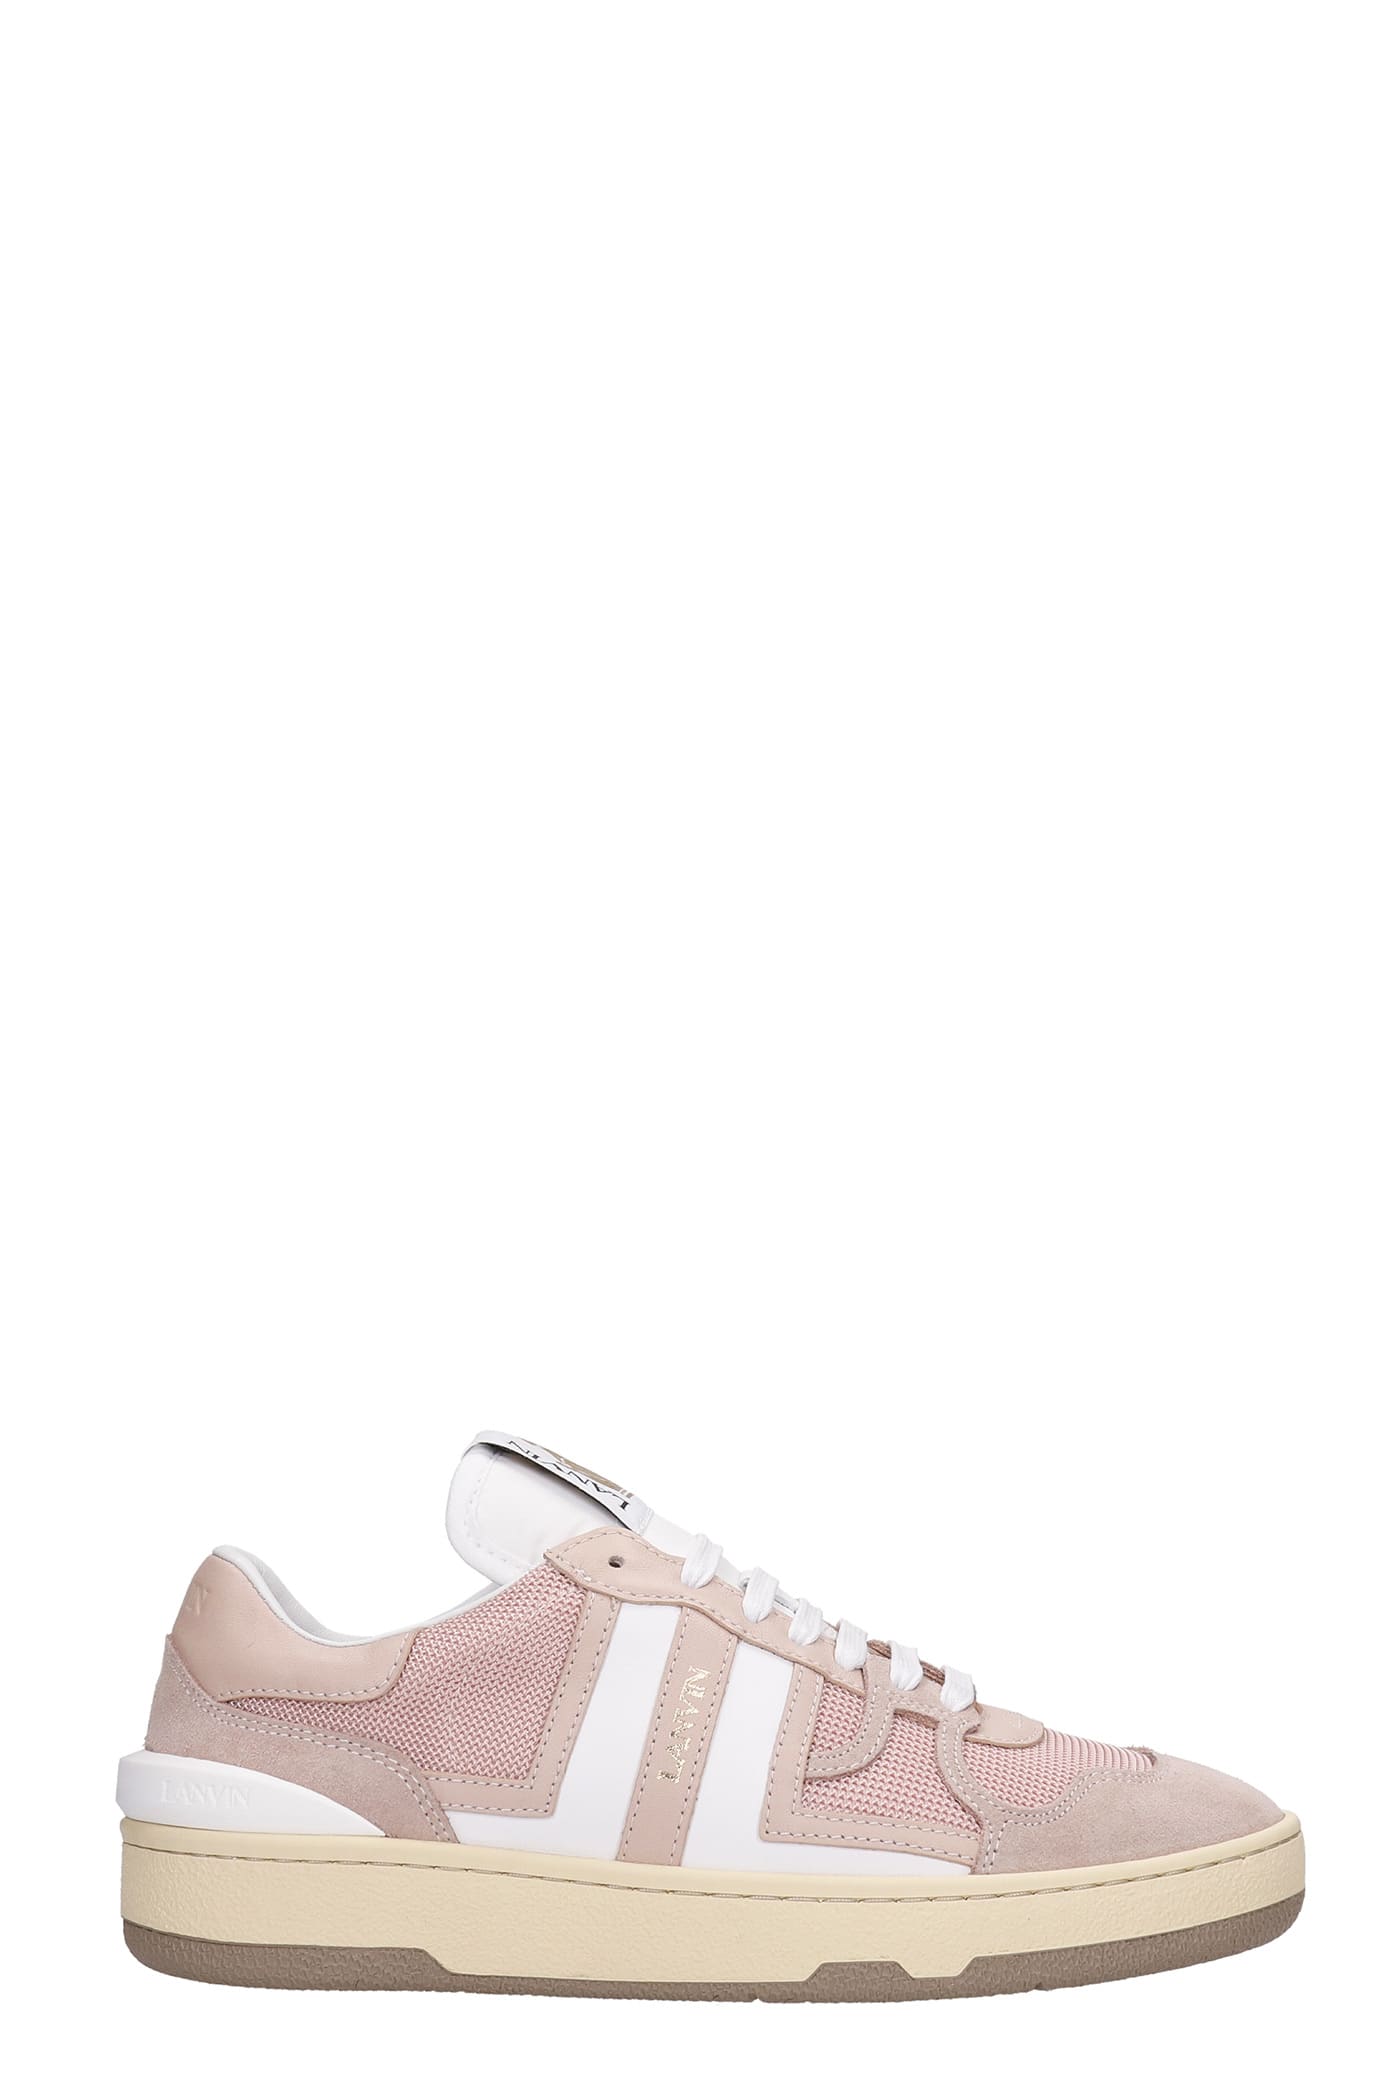 Lanvin Clay Sneakers In Rose-pink Suede And Leather